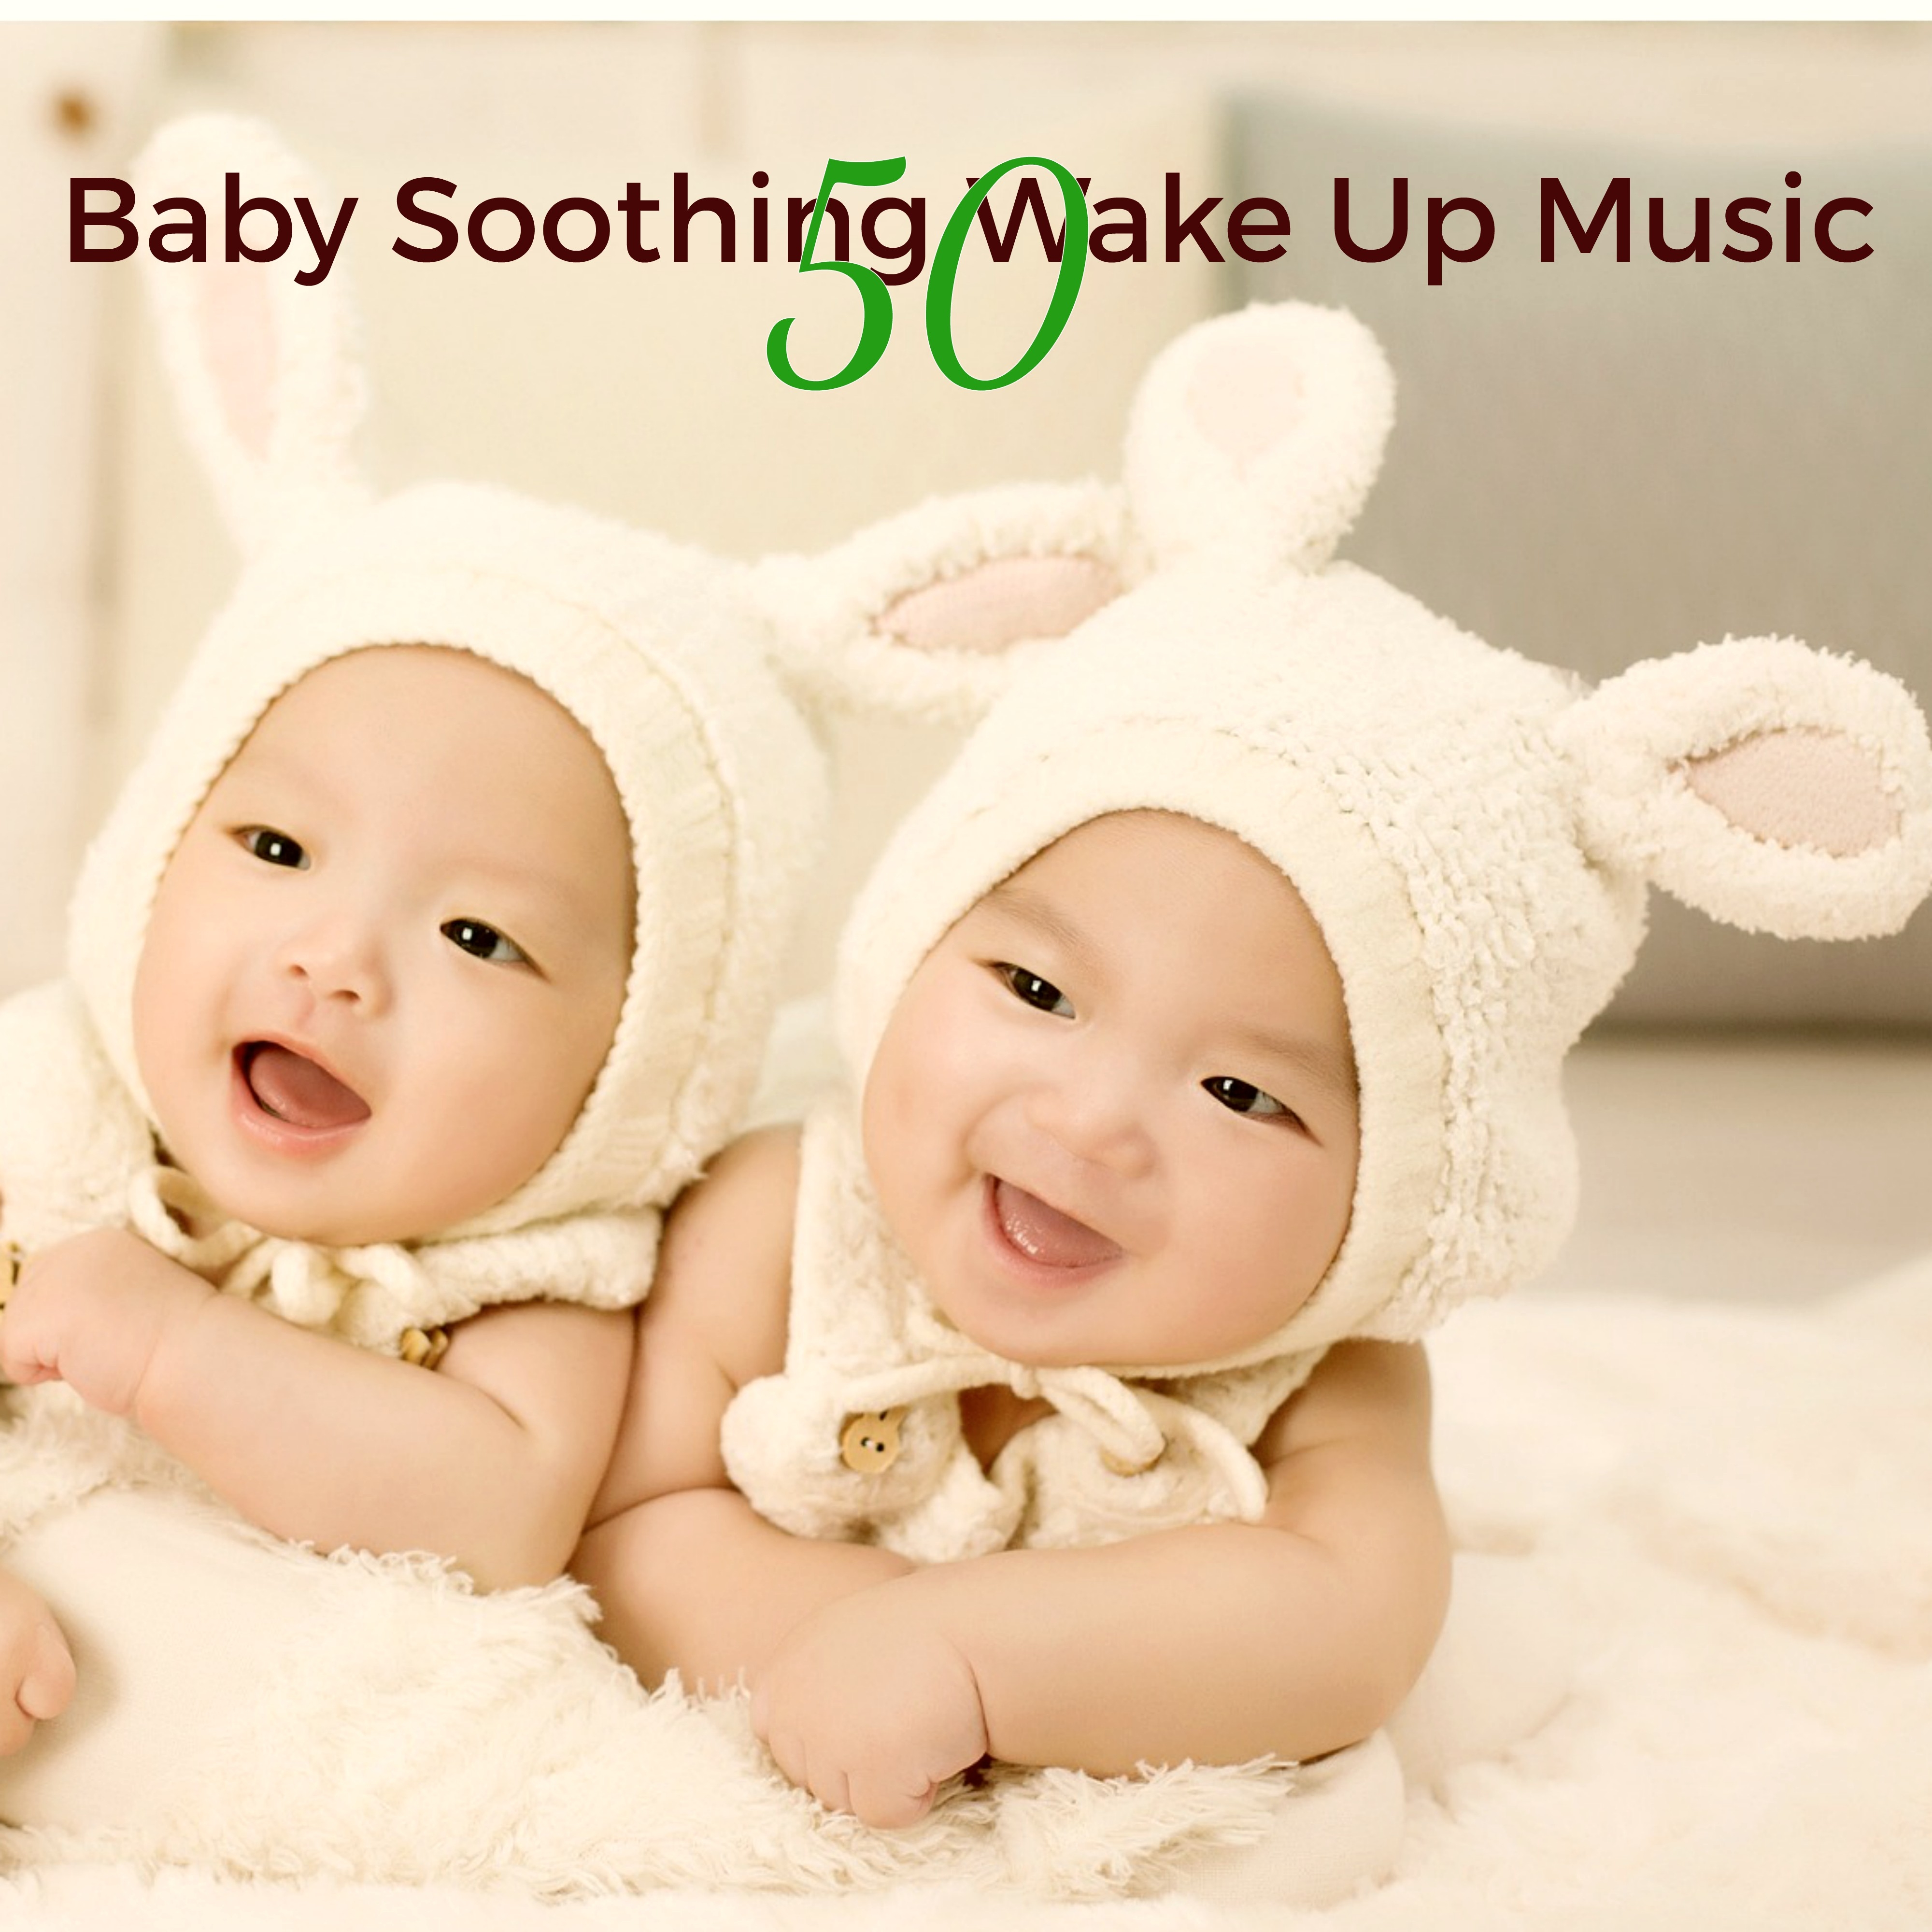 50 Baby Soothing Wake Up Music – Relaxing and Gentle Music for Your Little Baby